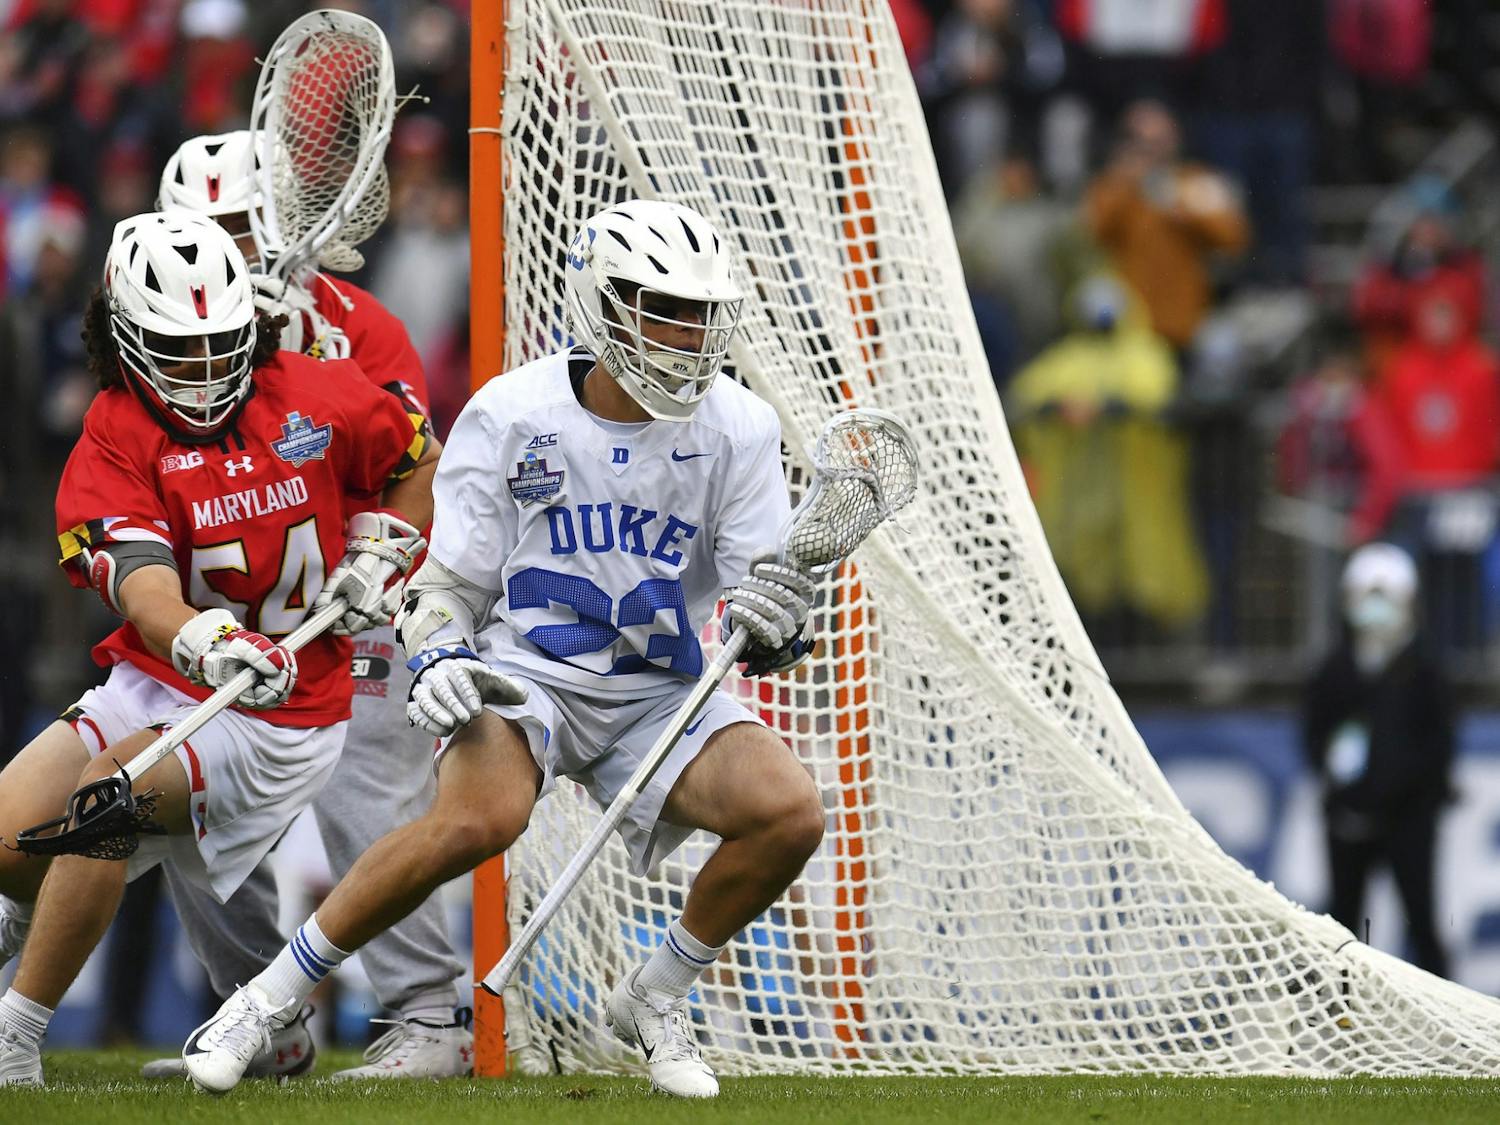 Michael Sowers was held to just two goals in Duke's semifinal loss to Maryland. 